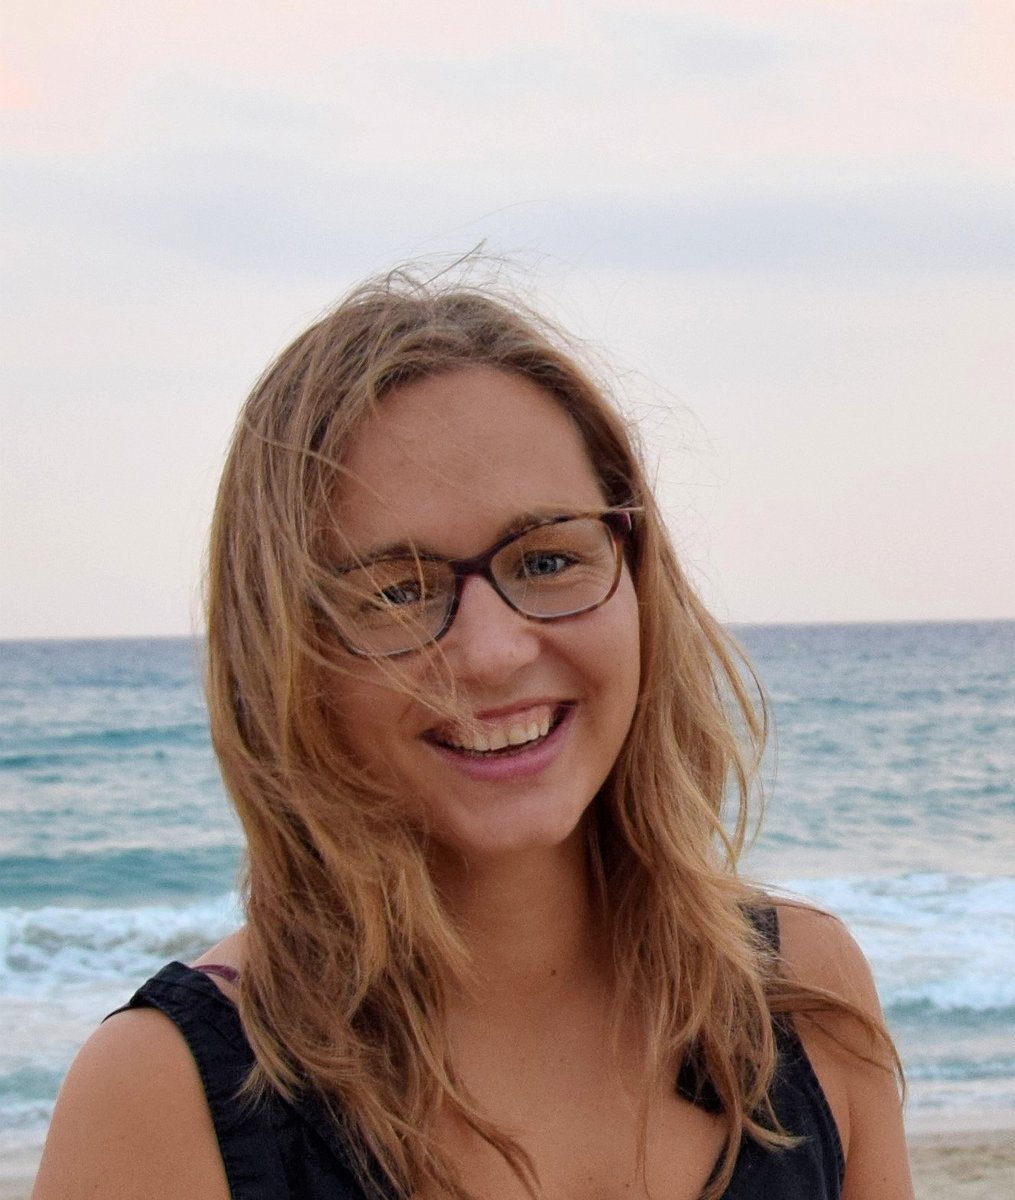 New Blog Post! 🗒️ Our former fellow Isabella Radhuber shares insights into her time @ITAS_KIT , where she was researching on the effects of climate change on our health from a #transdisciplinary perspective. We were happy to host you! Read more 👉tinyurl.com/5n6jzee8